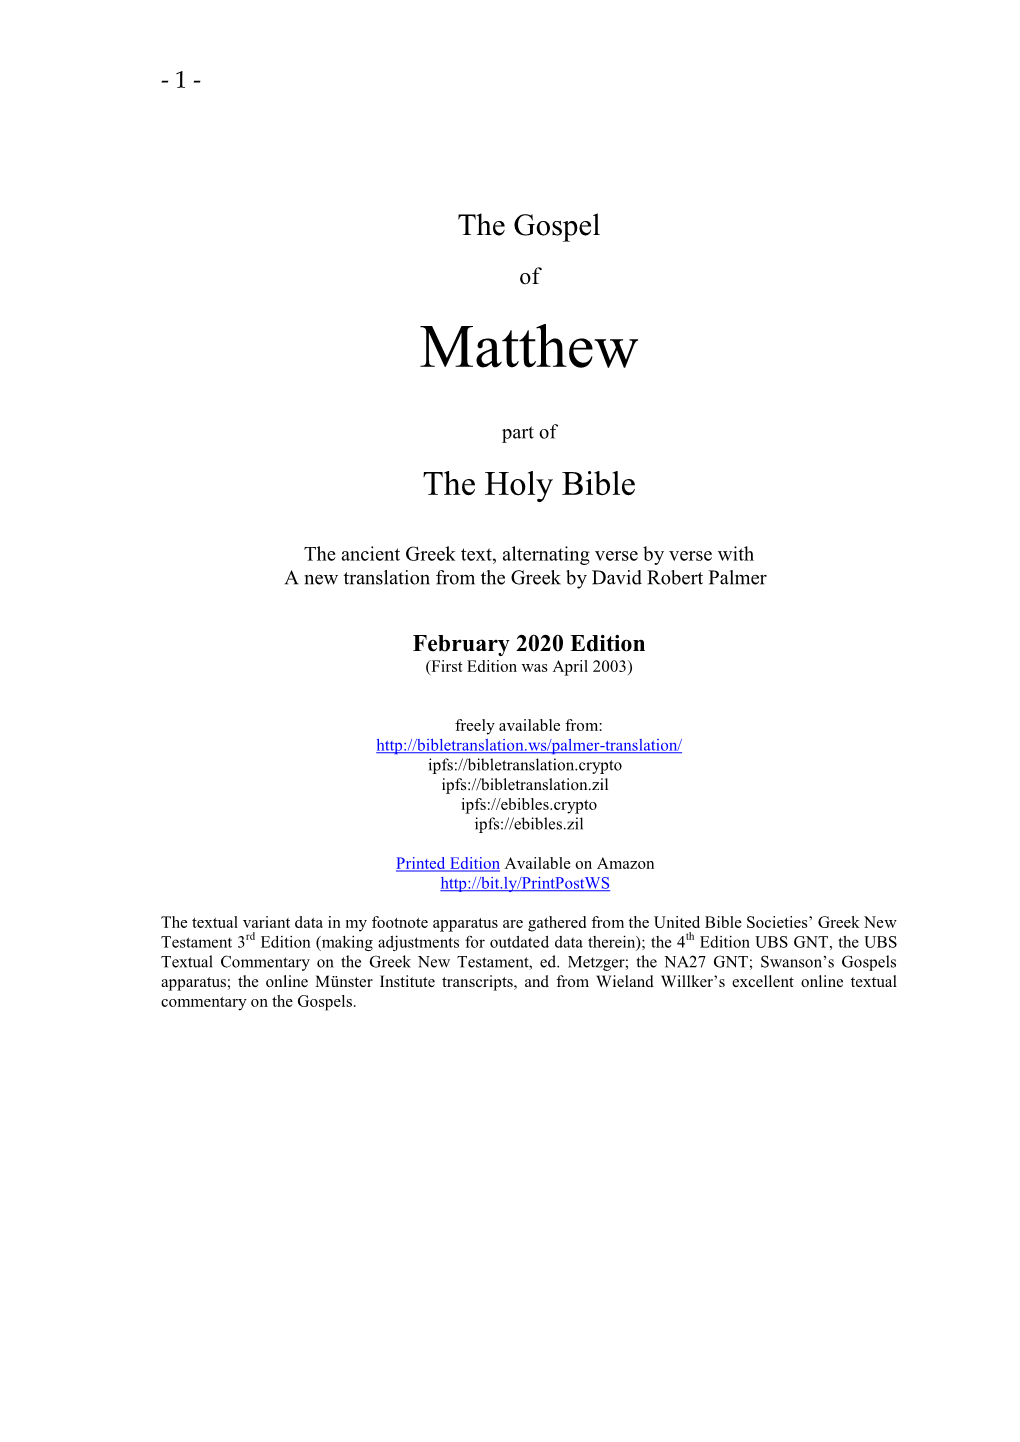 The Gospel of Matthew, with the Greek and English Text Alternating